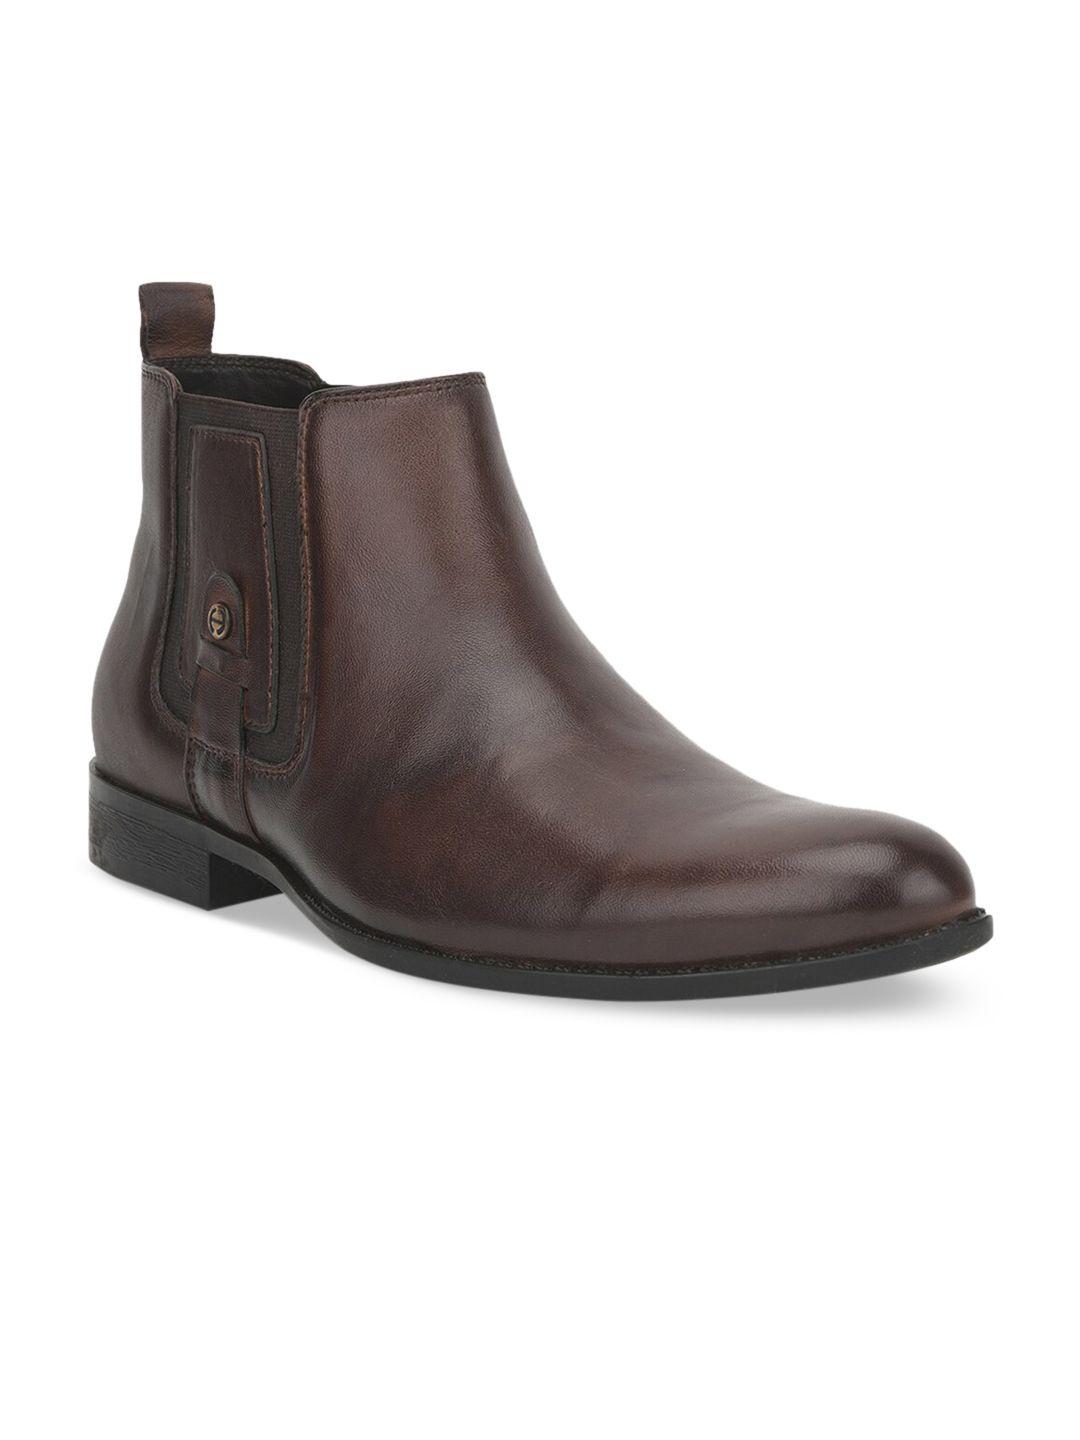 liberty men brown solid leather formal boots